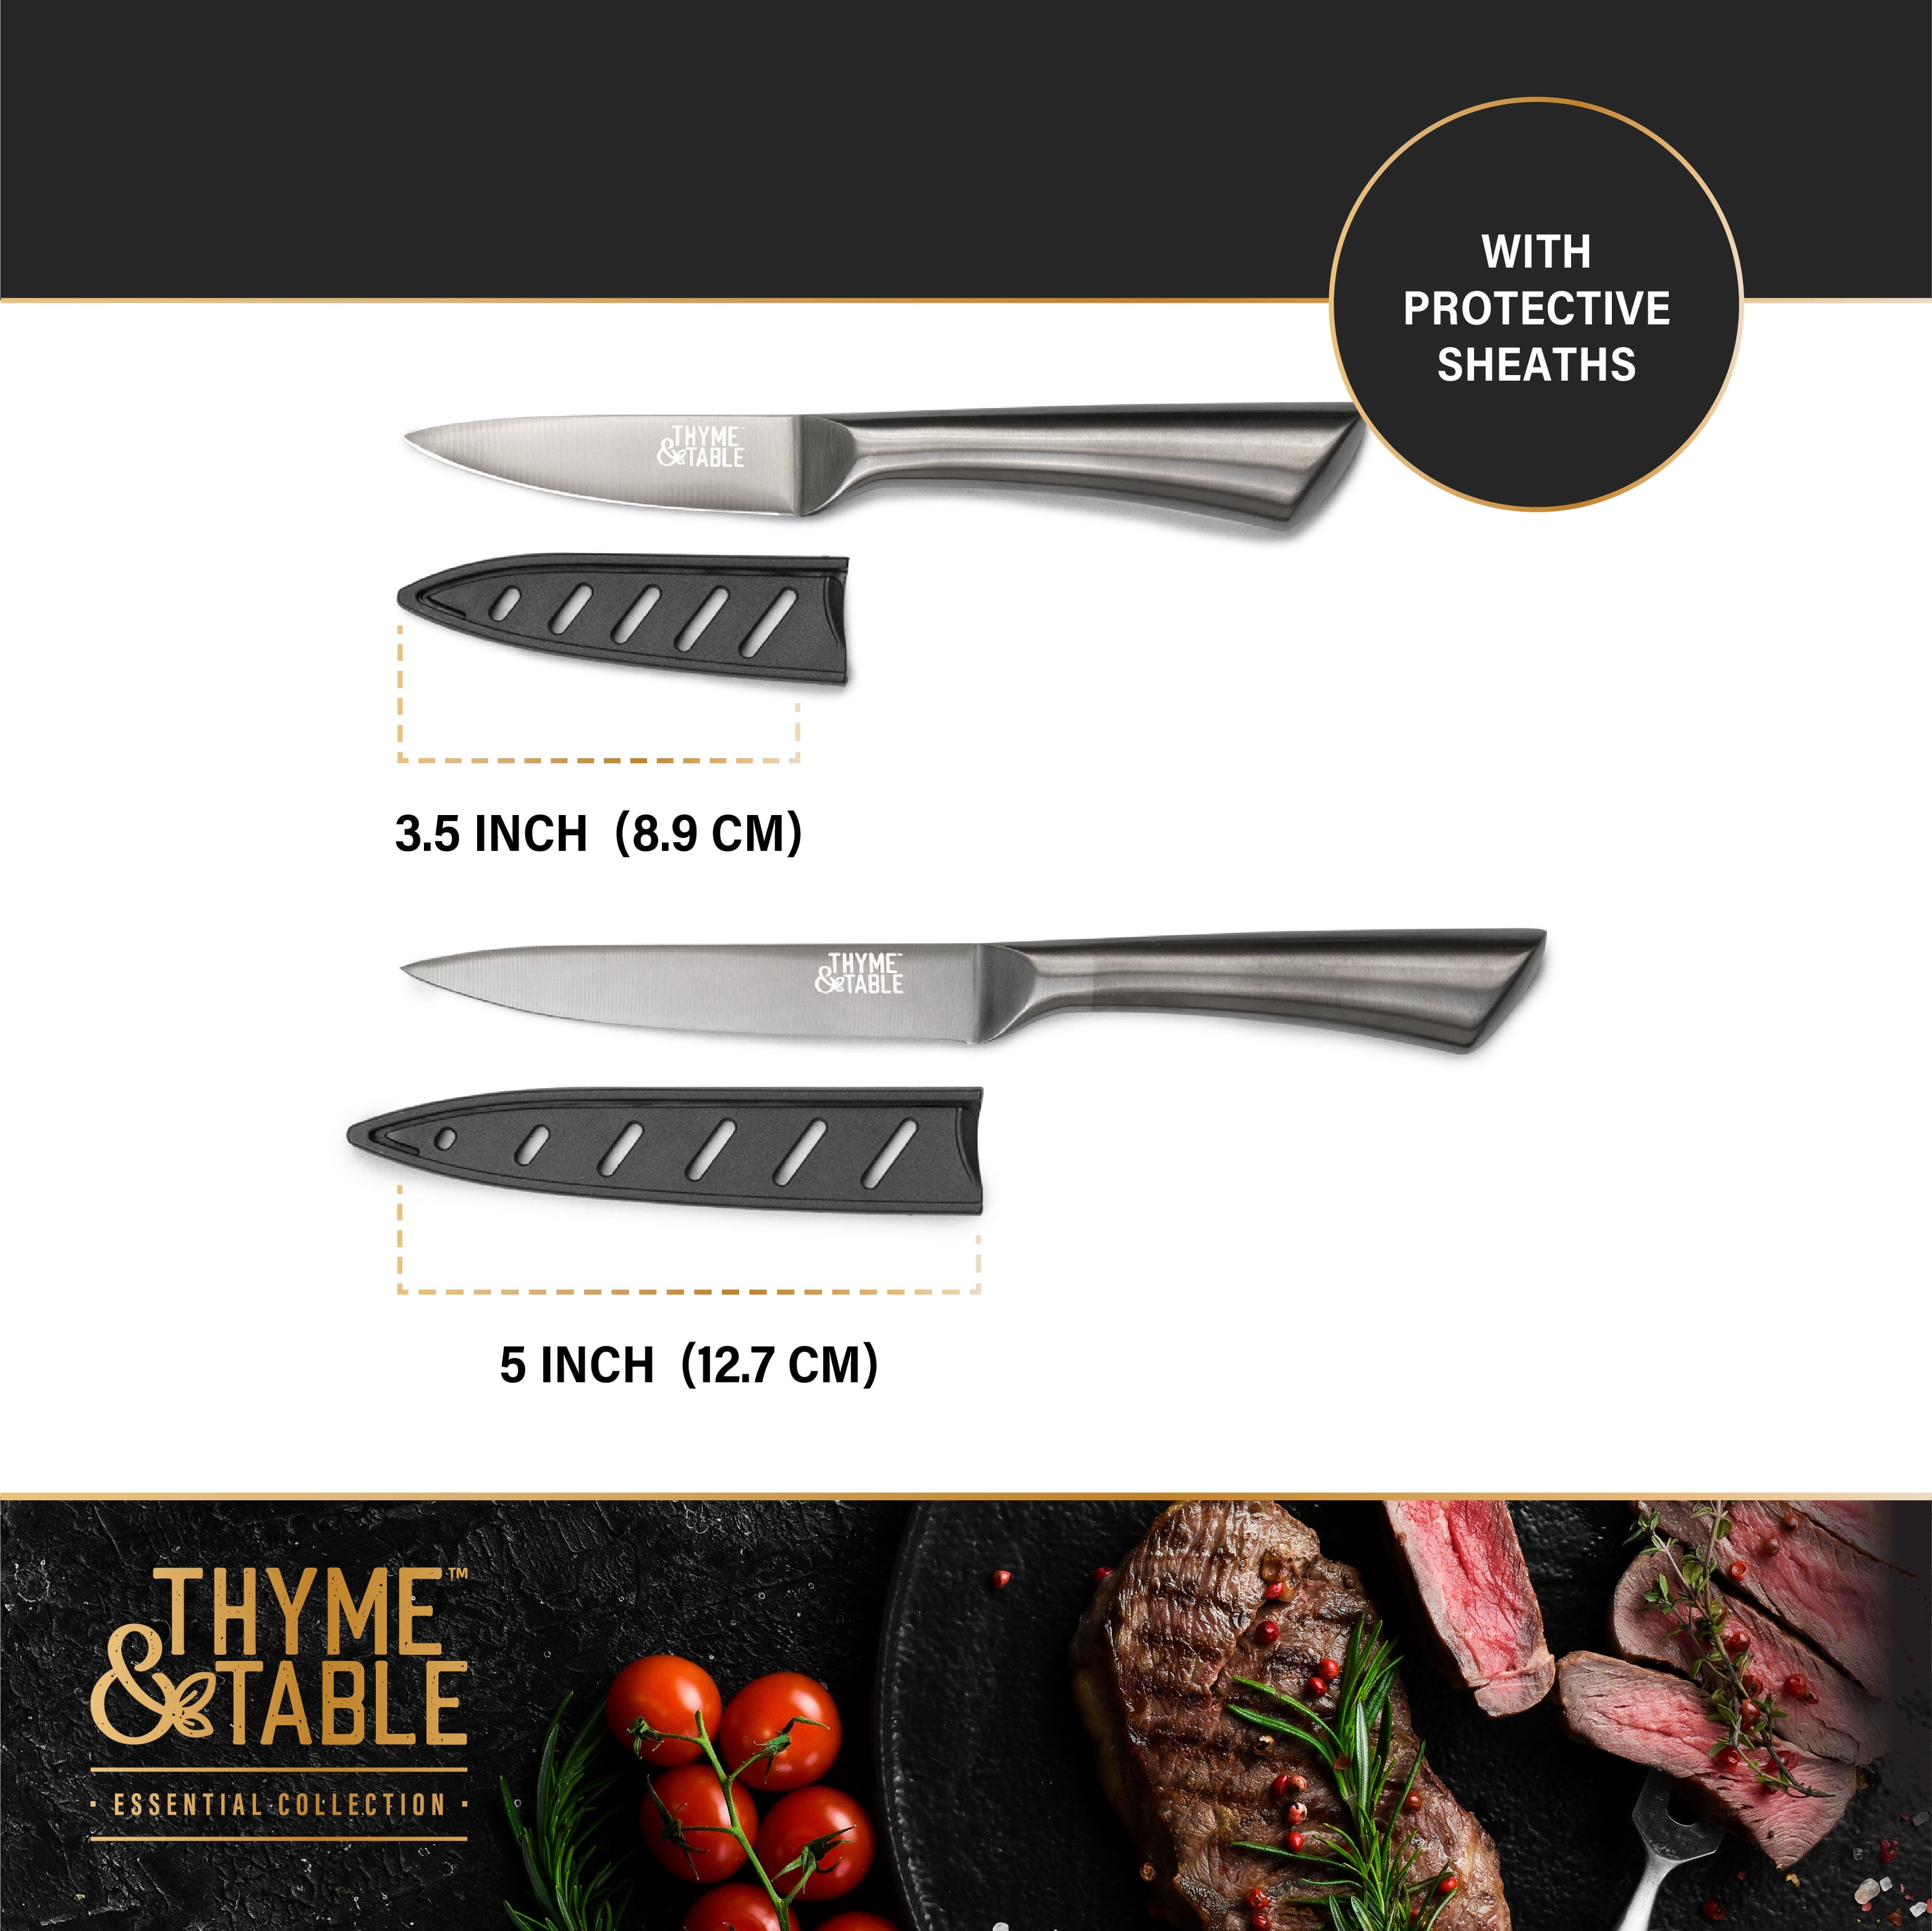 Thyme & Table Gold Chef Knife Set, 3 Piece 